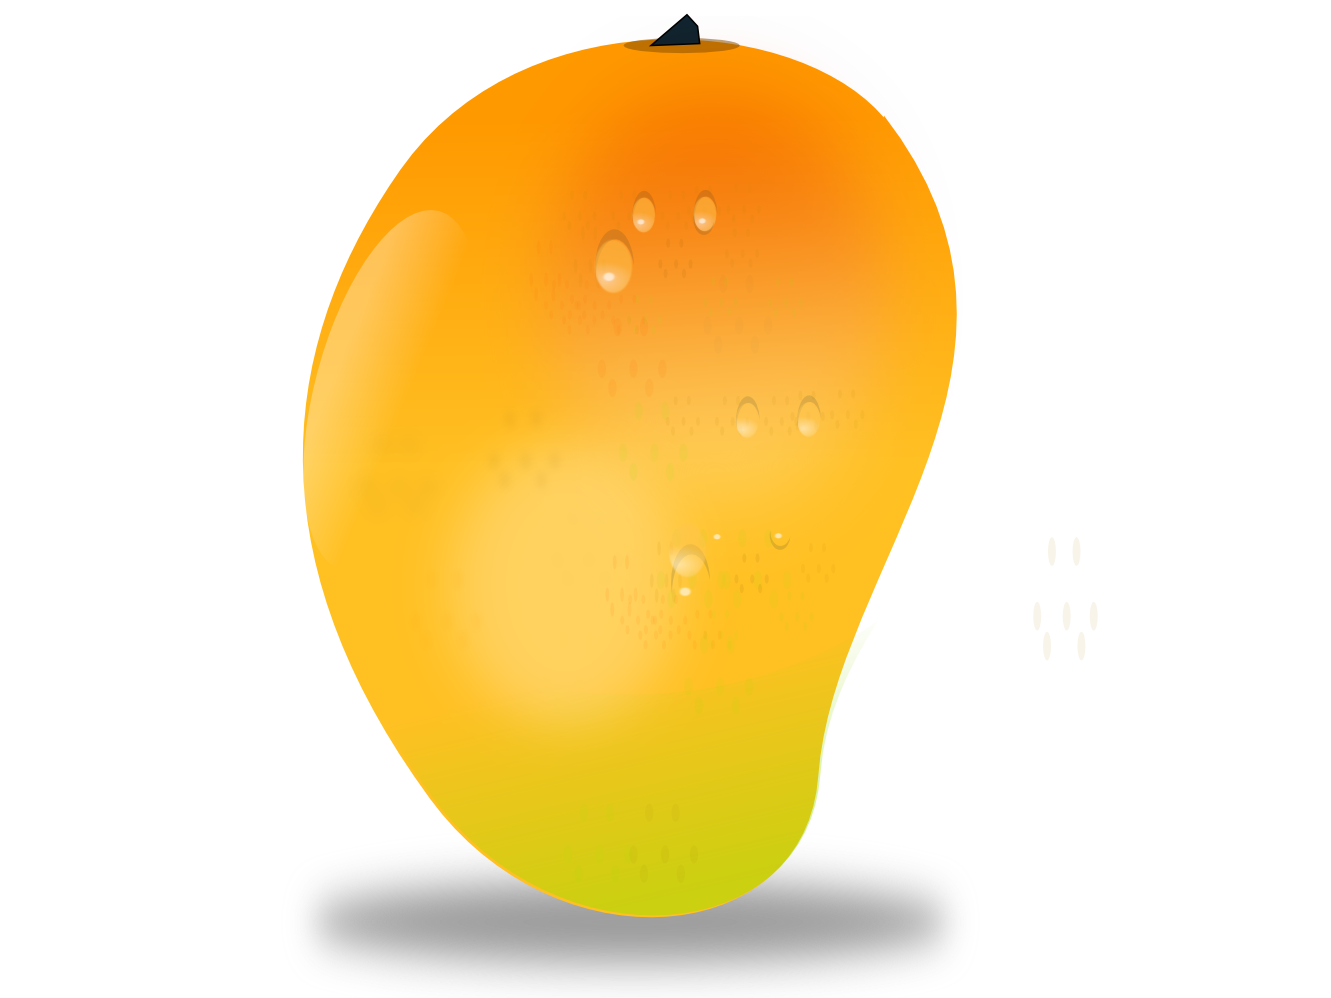 Mango | Free Images at Clker.com - vector clip art online, royalty free